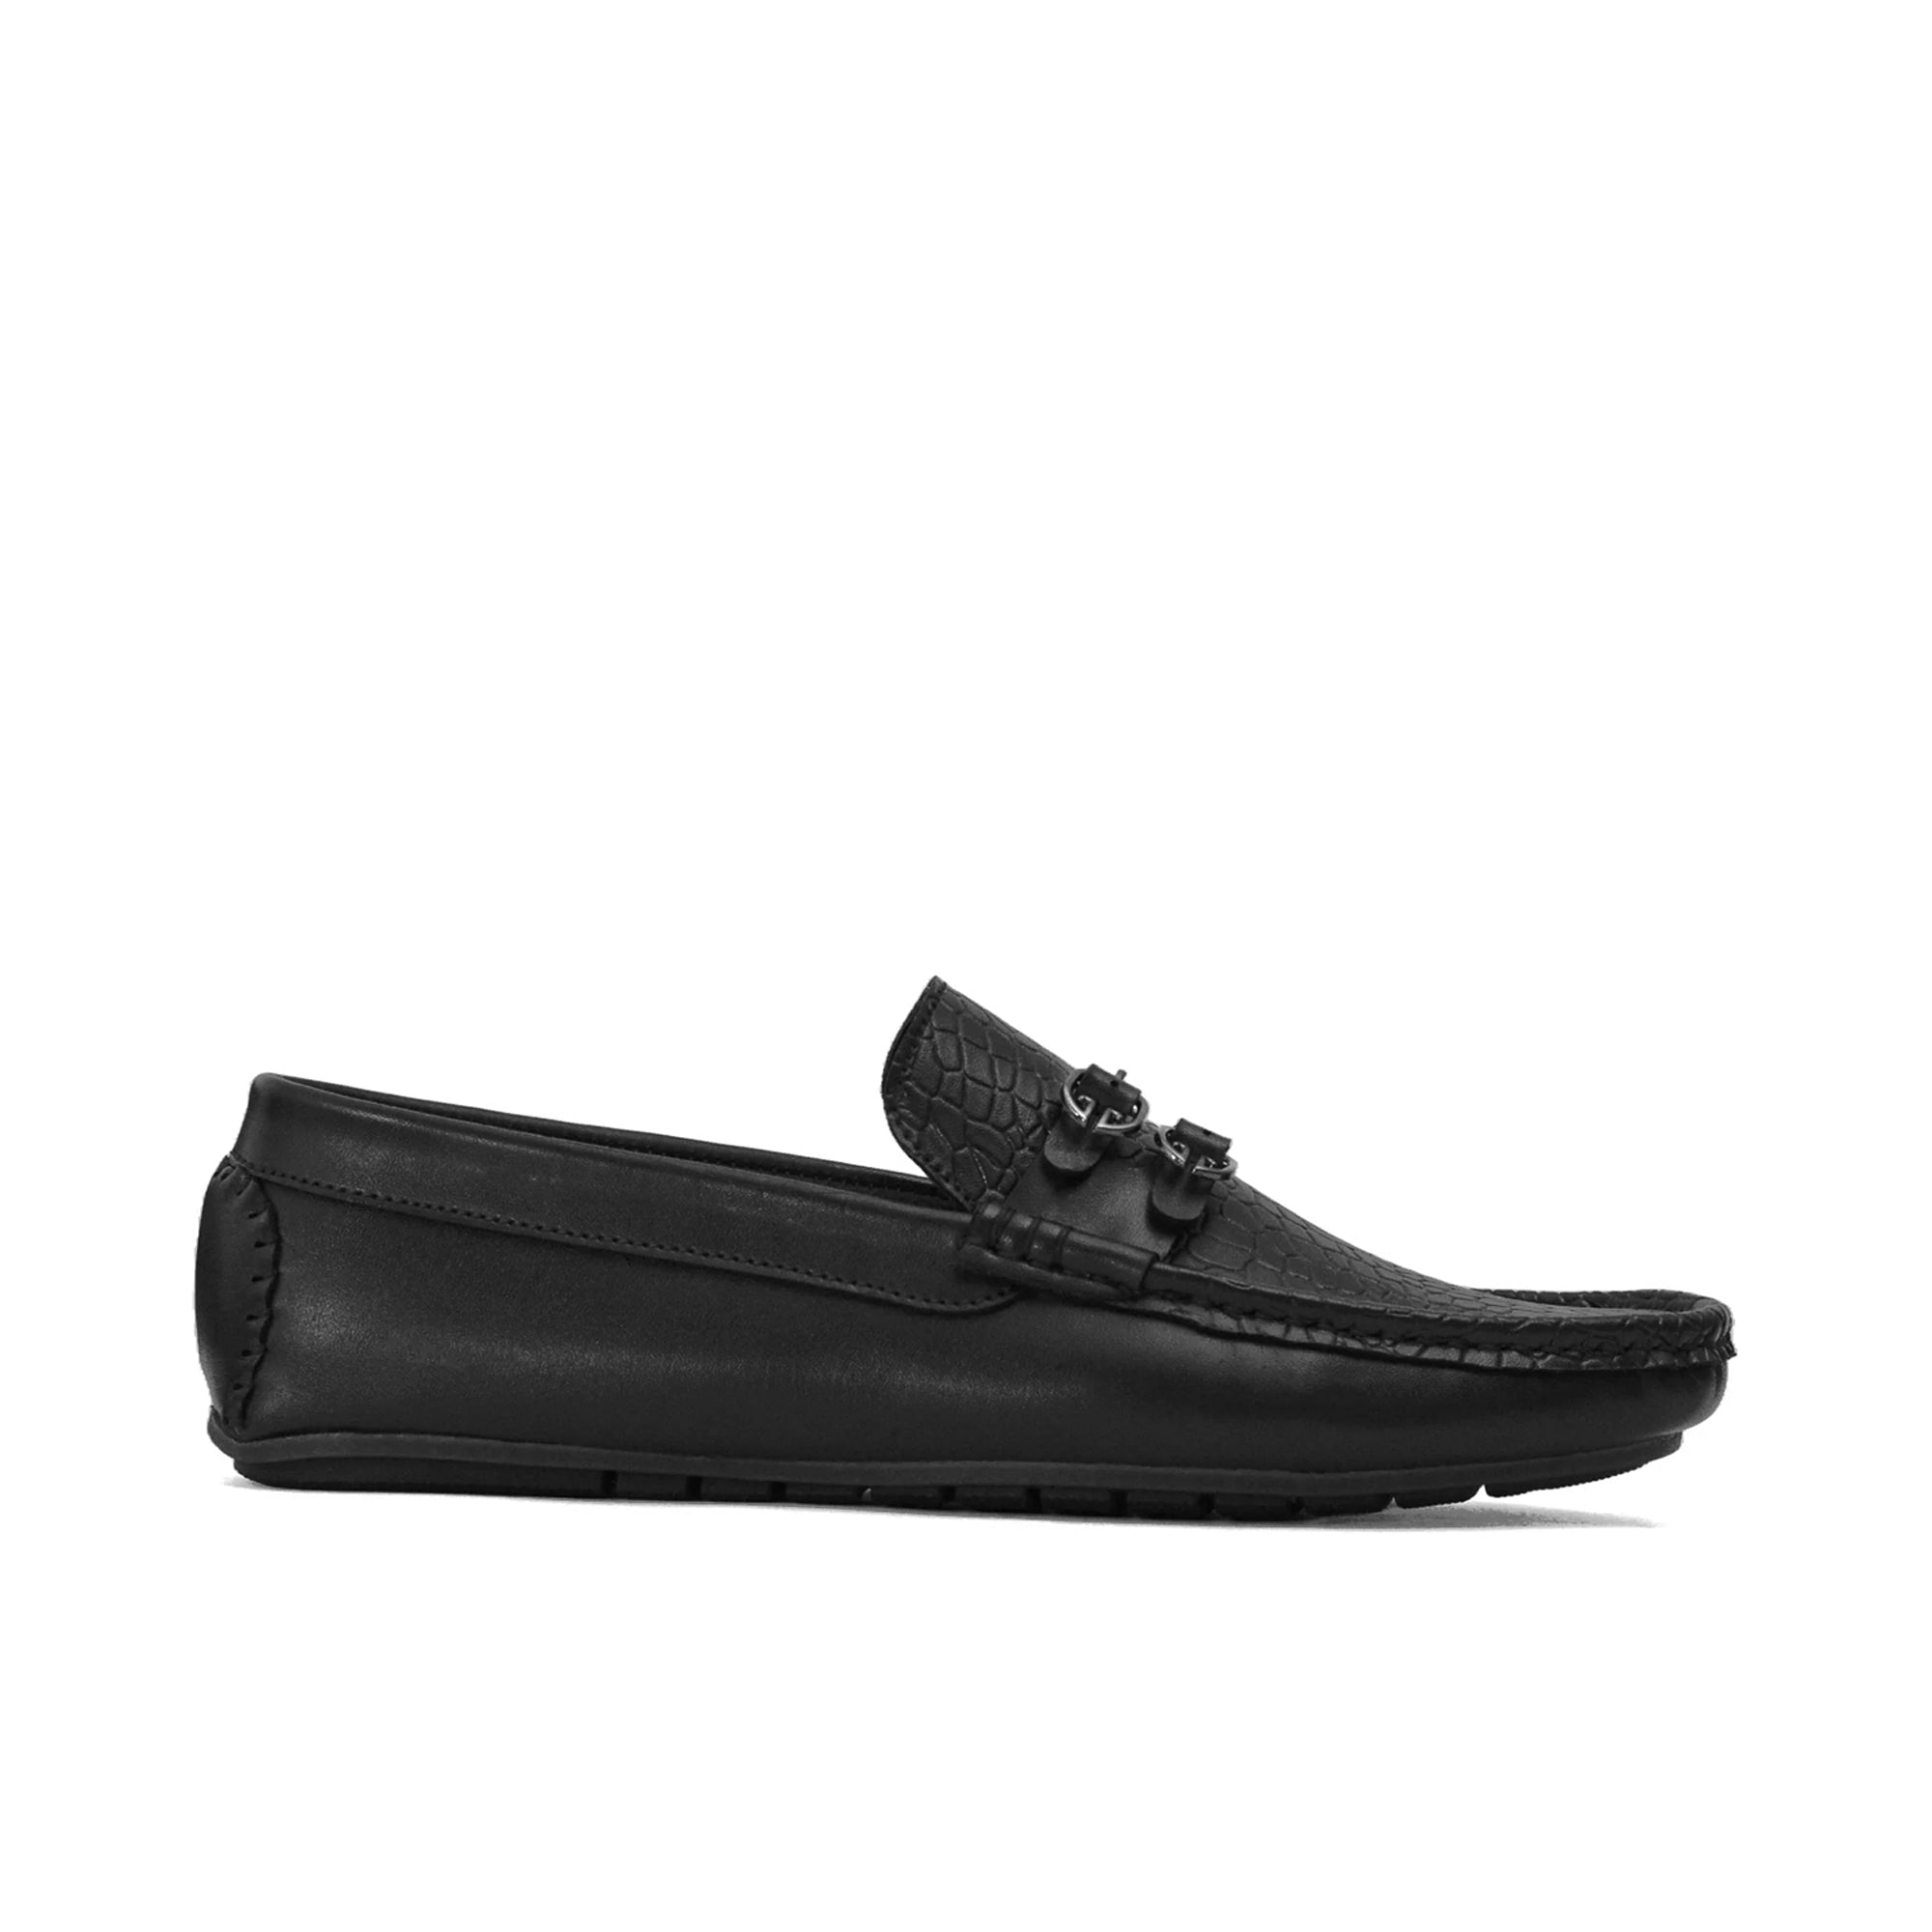 Black Buckle Crafted Loafer LS05